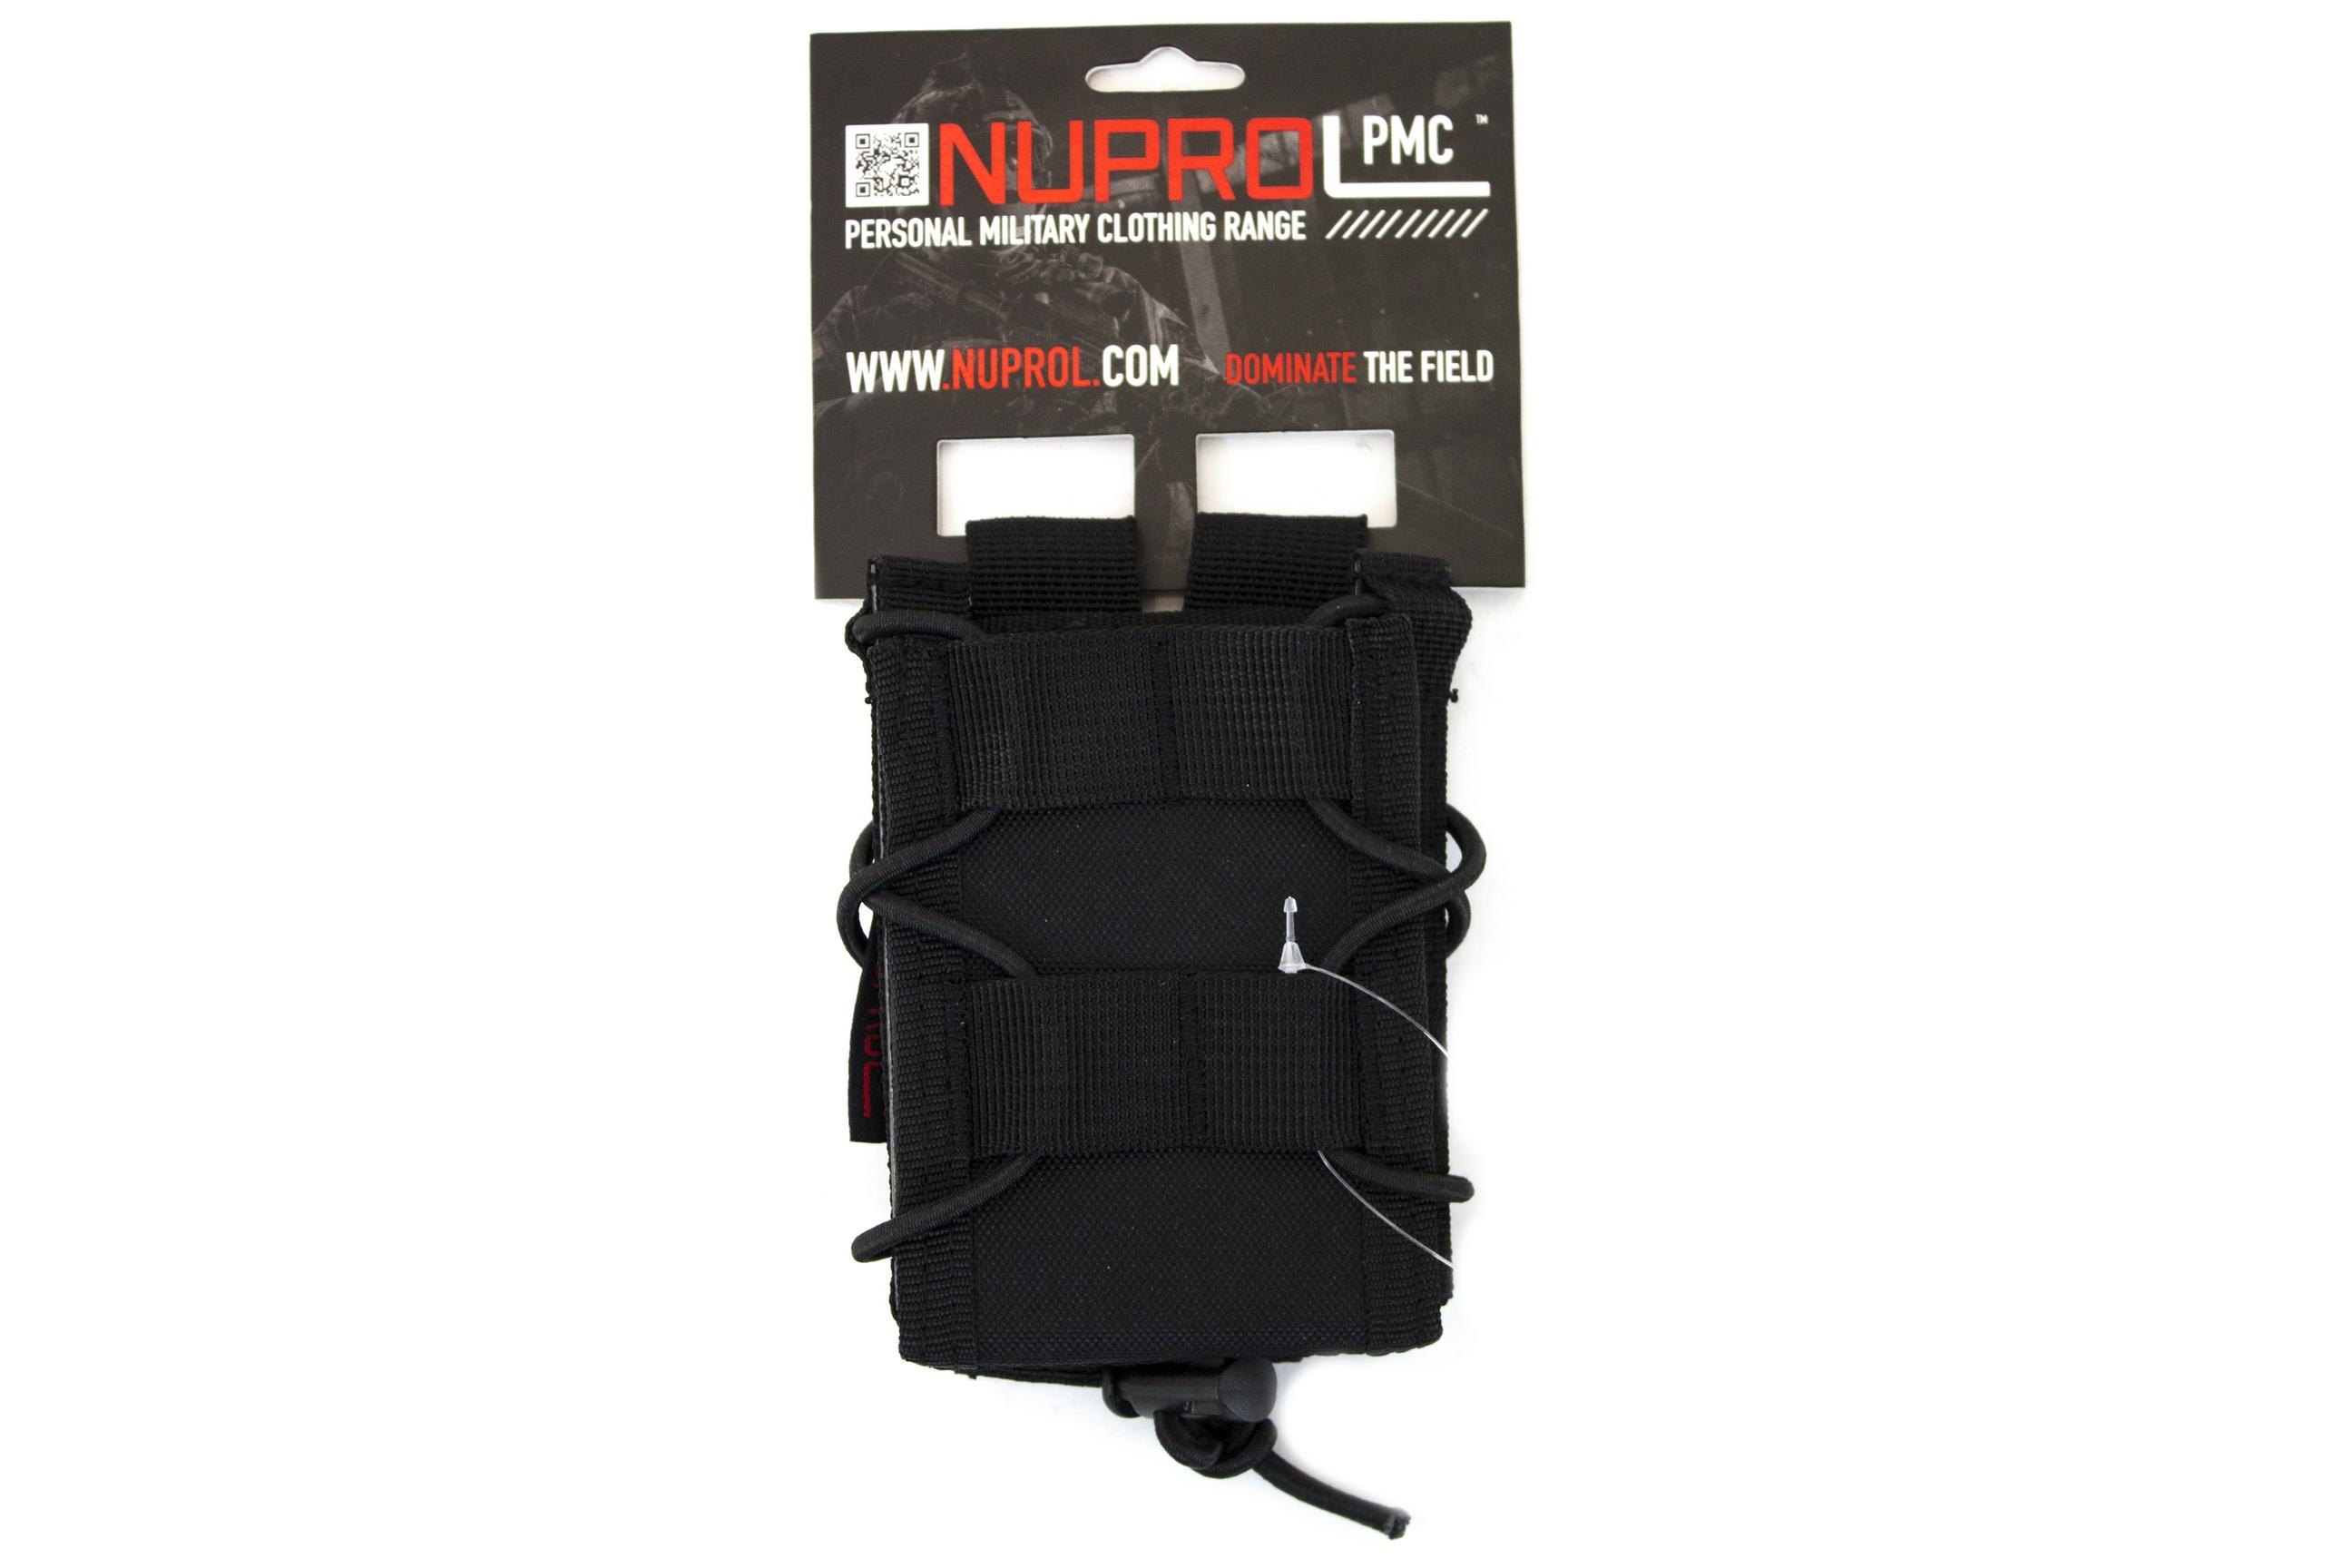 NUPROL Rifle Open Top Pouch PMC